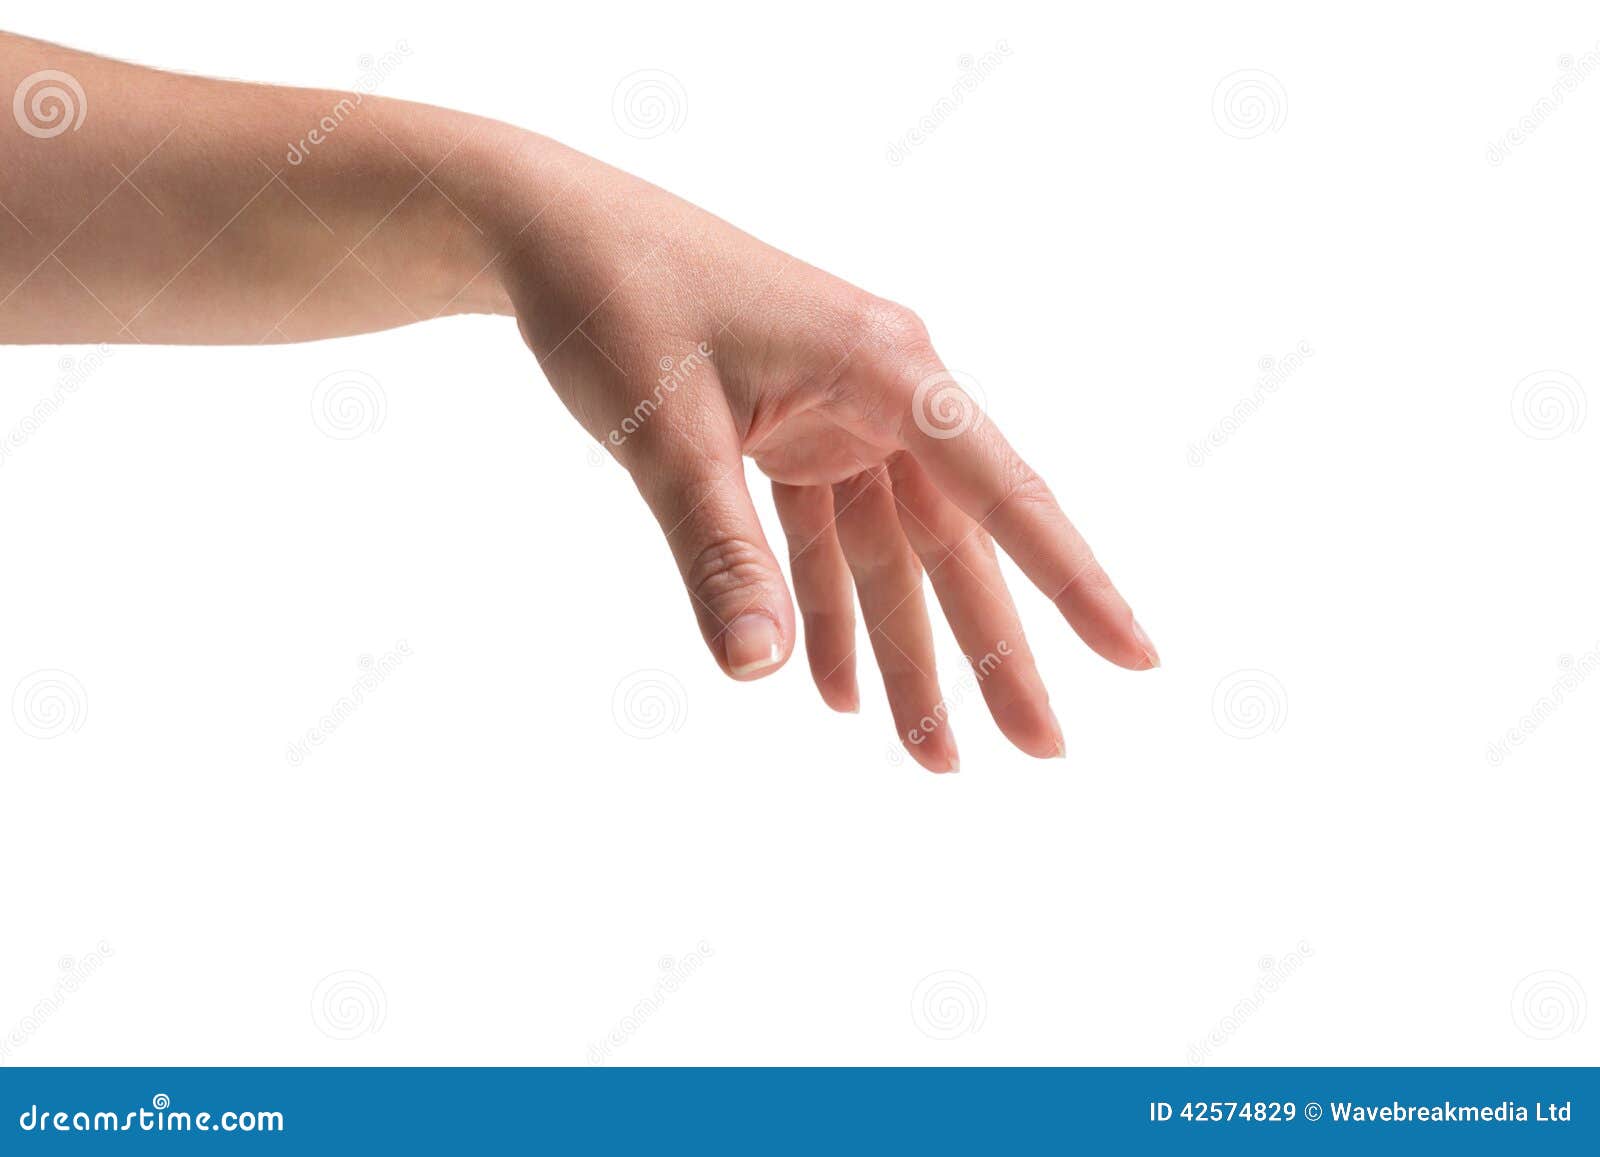 Female hand being held out on white background